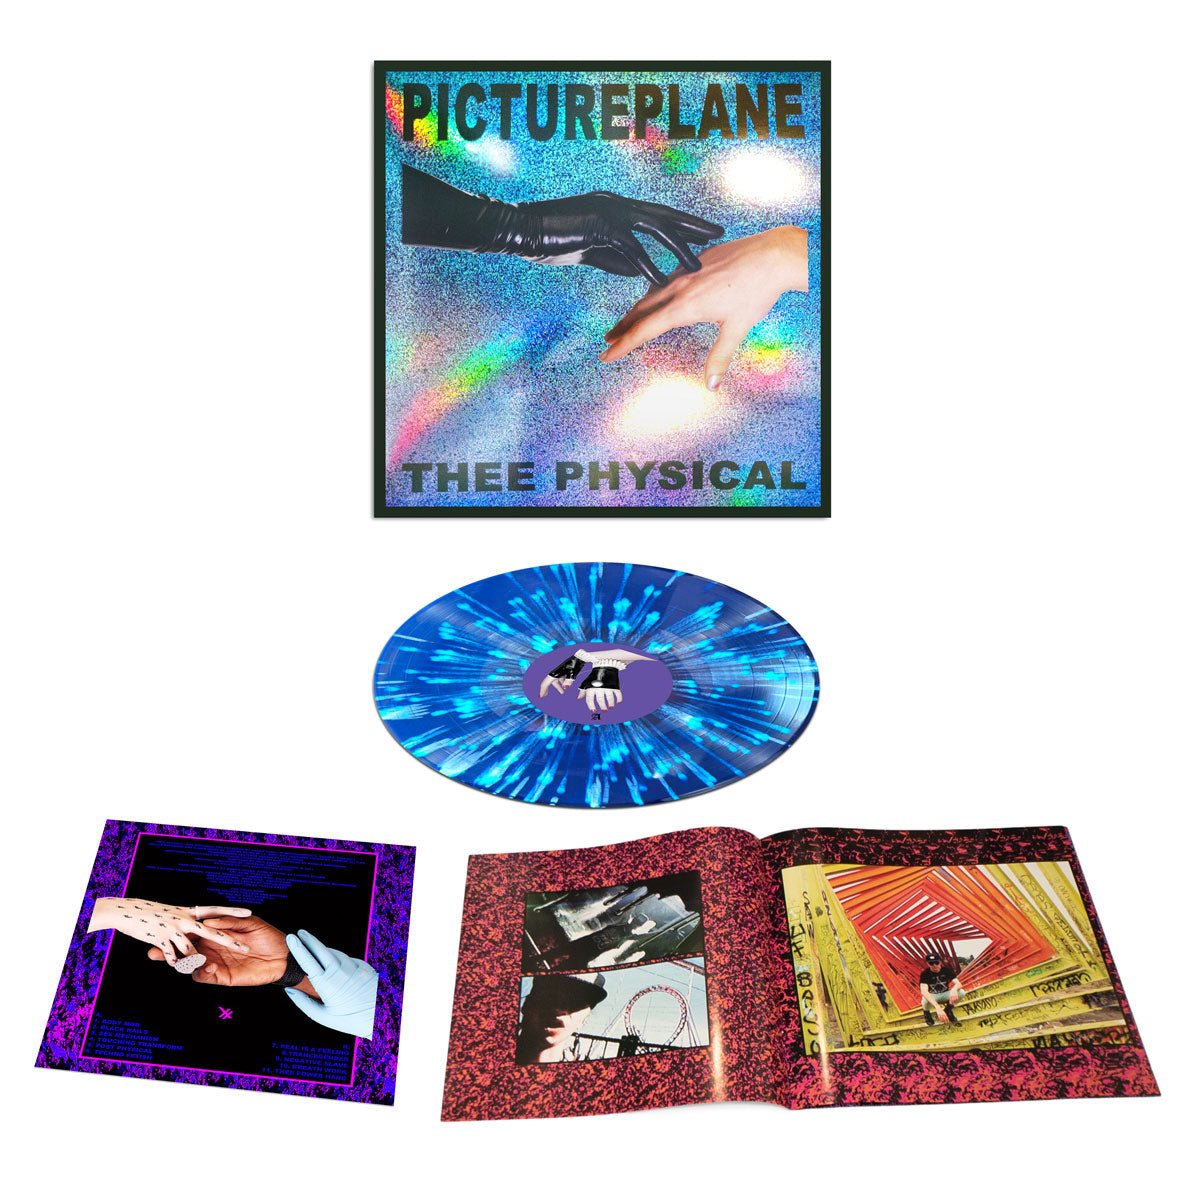 PICTUREPLANE - THEE PHYSICAL LP + T-Shirt Bundle - 100% Electronica Official Store (Photo 4)